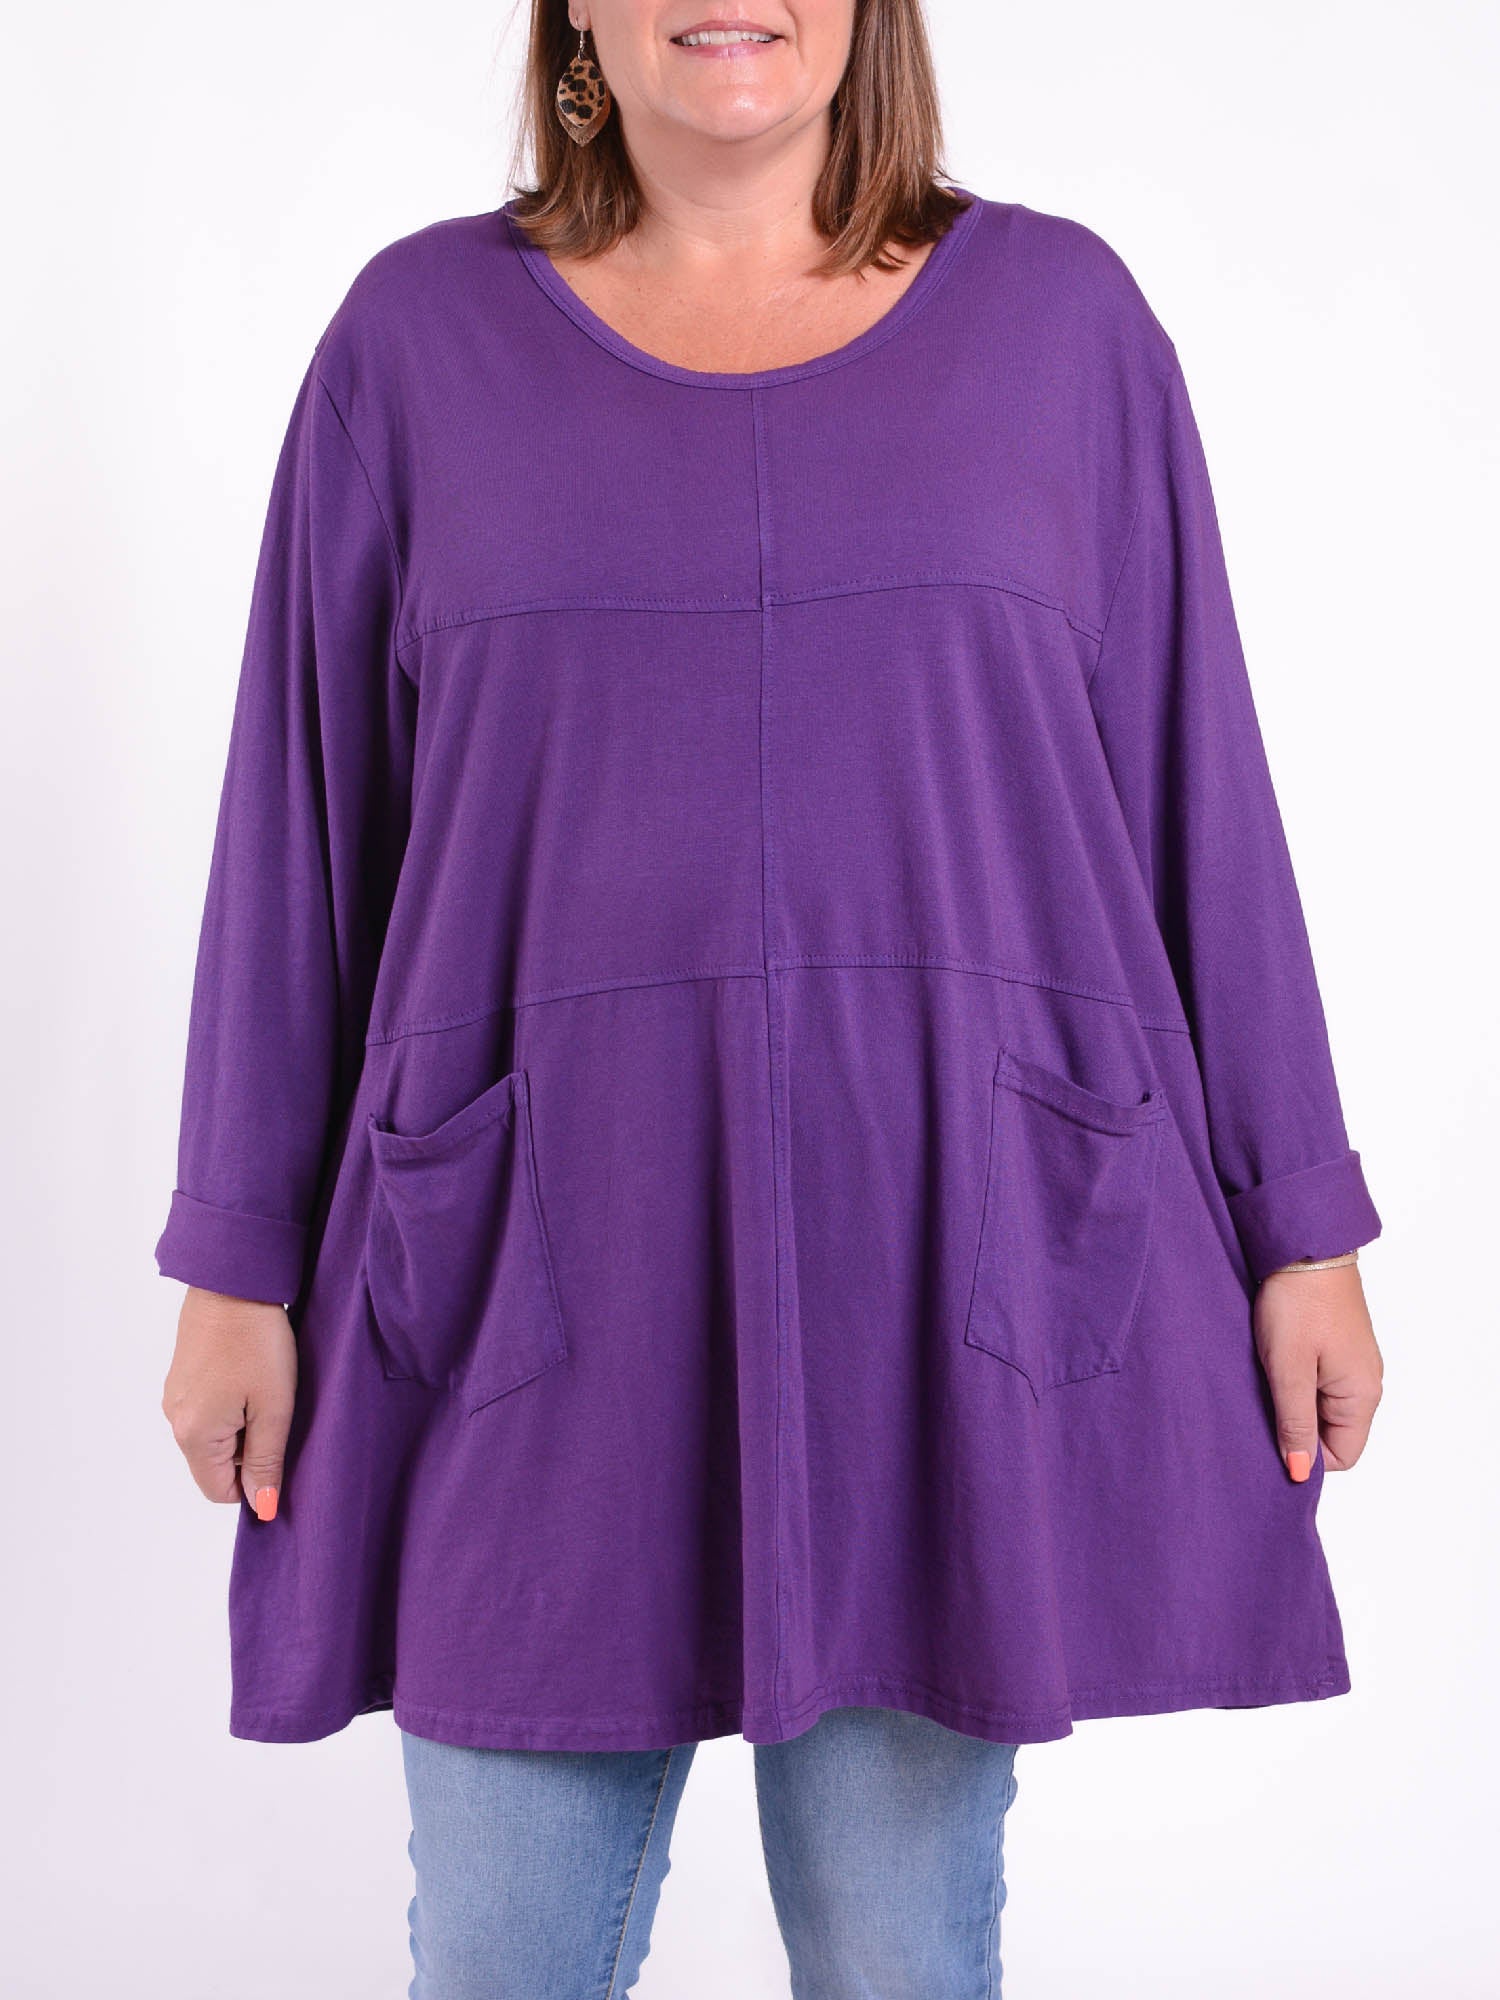 Long Sleeved Stitch Tunic Top - 105151 Cotton, Tops & Shirts, Pure Plus Clothing, Lagenlook Clothing, Plus Size Fashion, Over 50 Fashion